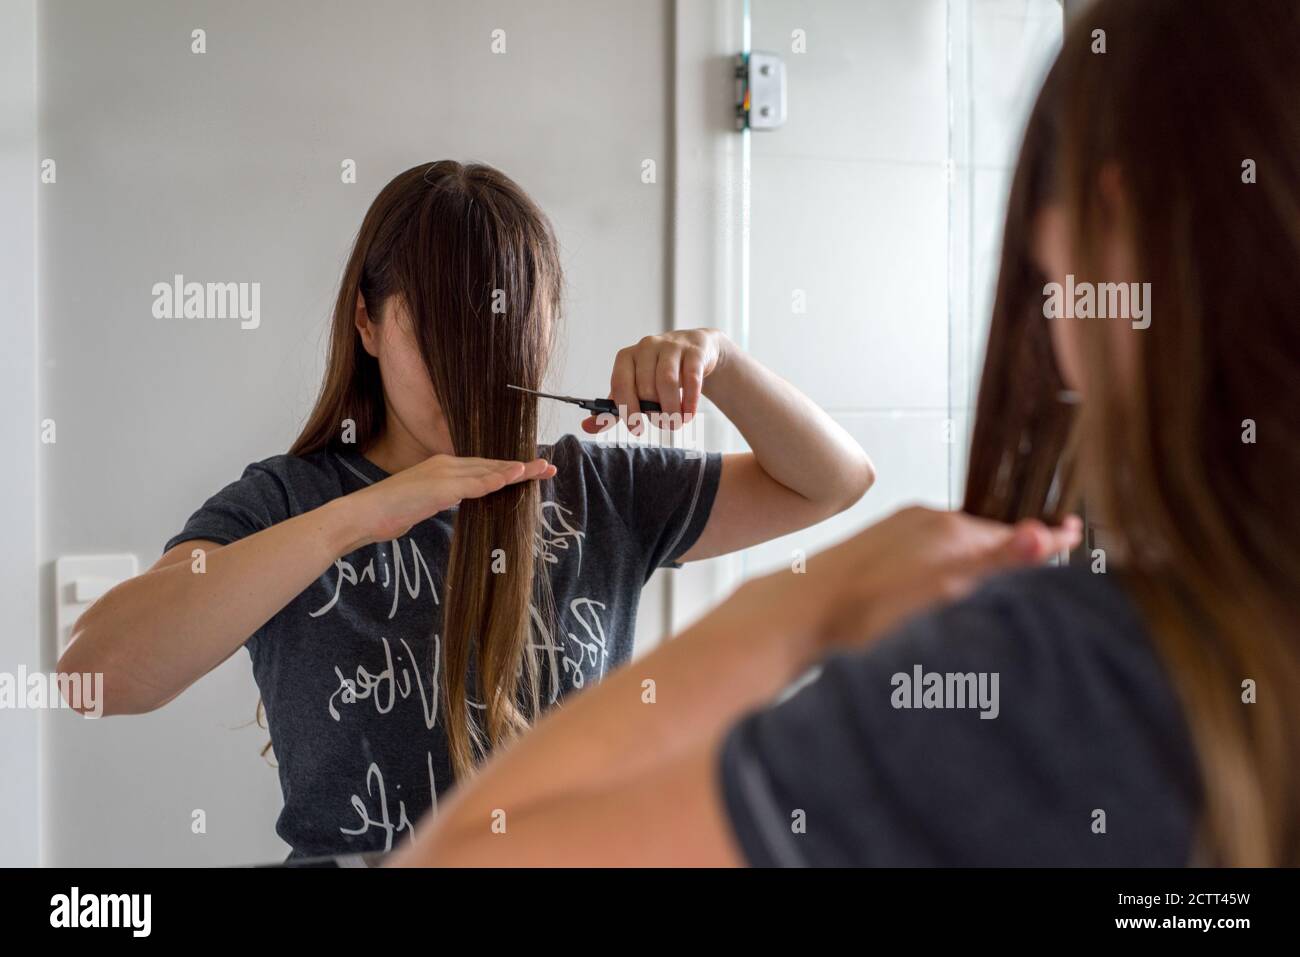 Woman with long brown hair cutting her own bangs Stock Photo